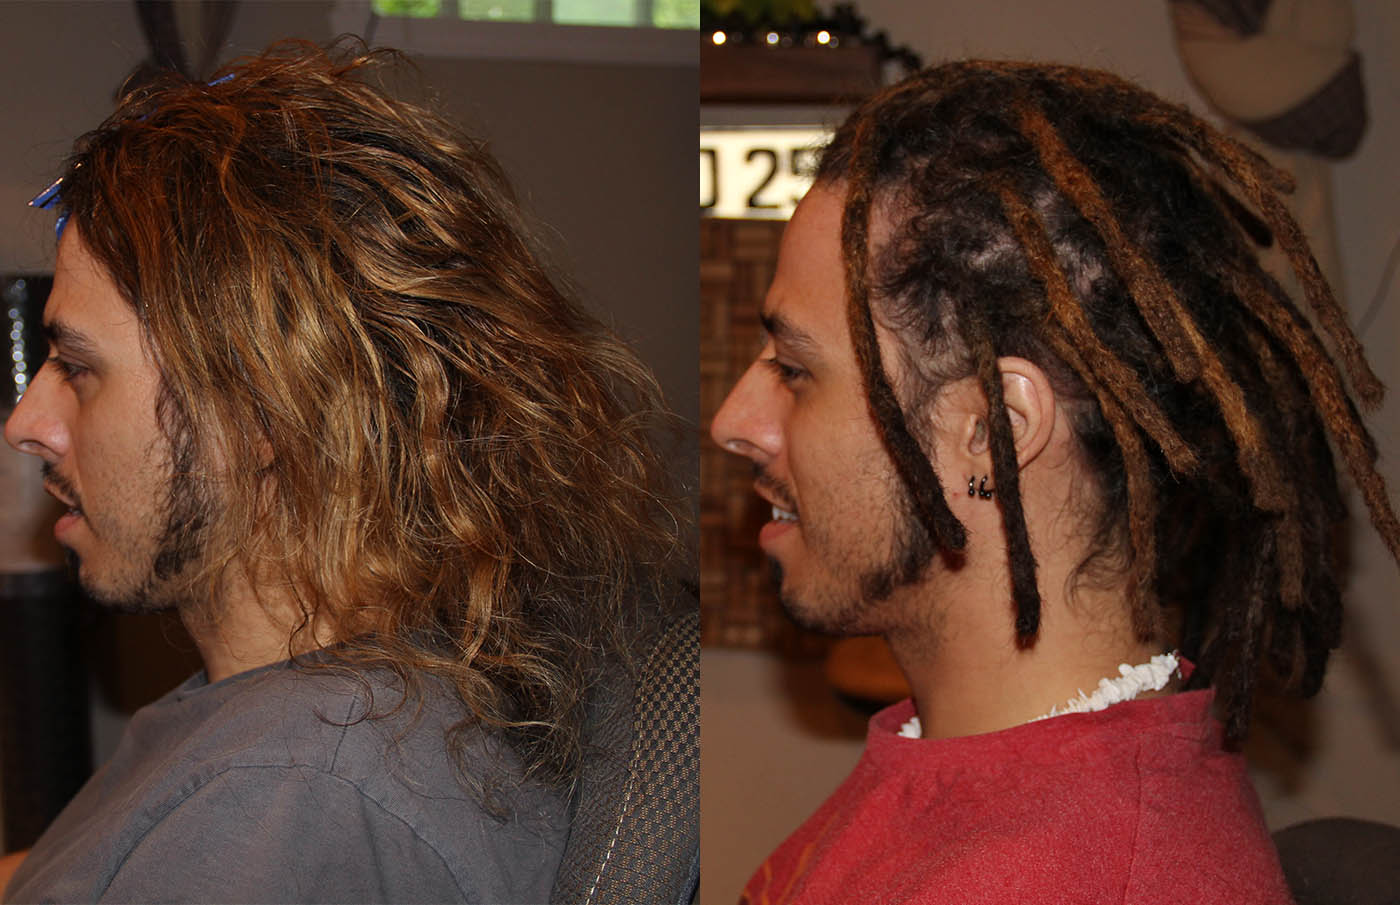 Jasmin's dreadlocks with a bit of hair extentions to make them a bit longer and thicker from Longeuil.